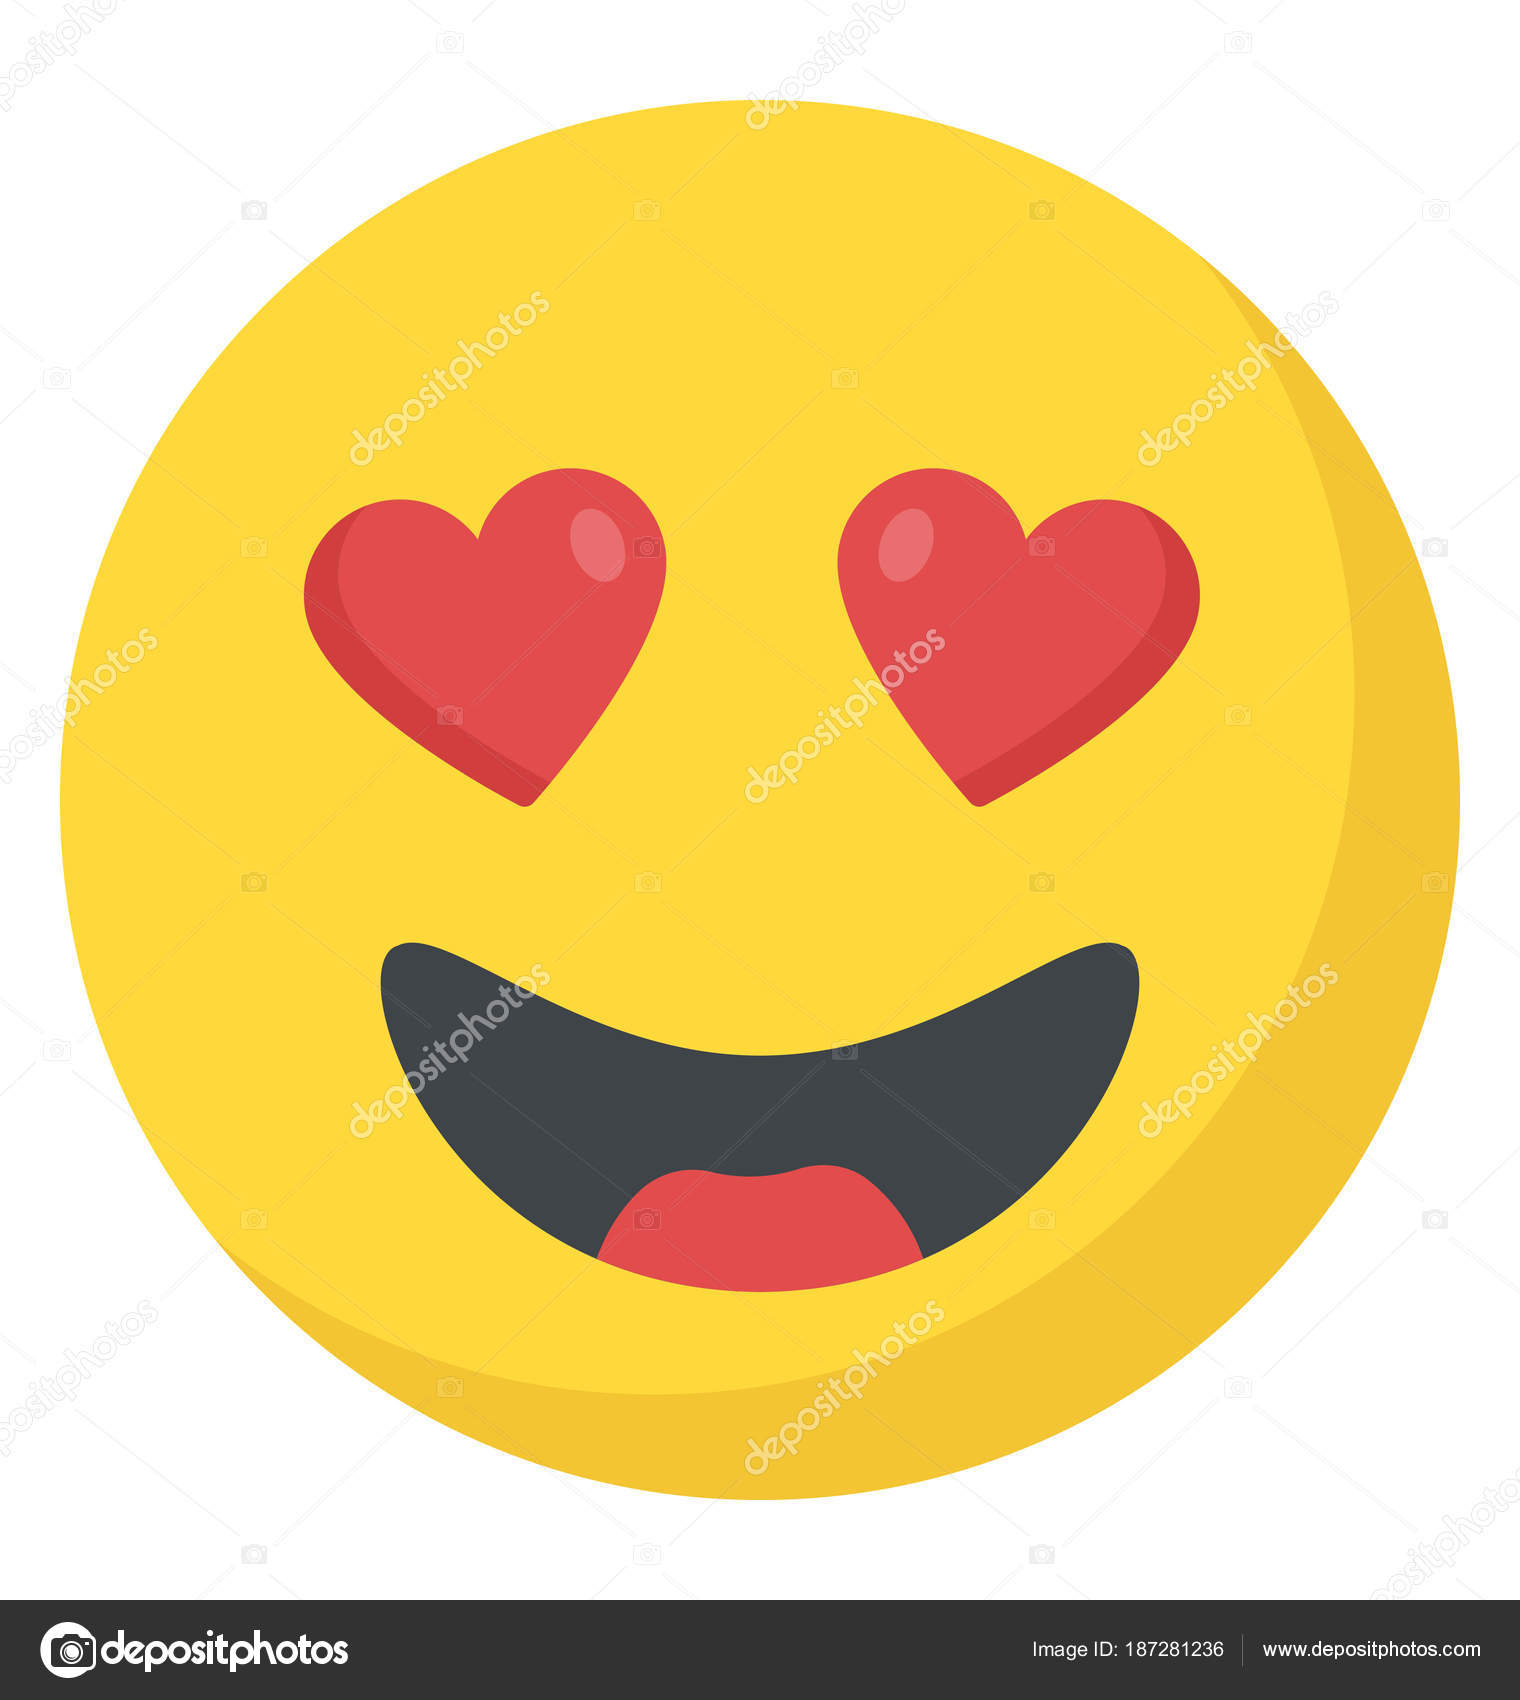 Feeling Loved Emoticon Feeling Loved Emoticon Emoji Showing Expression Love Stock Vector C Vectorspoint 187281236